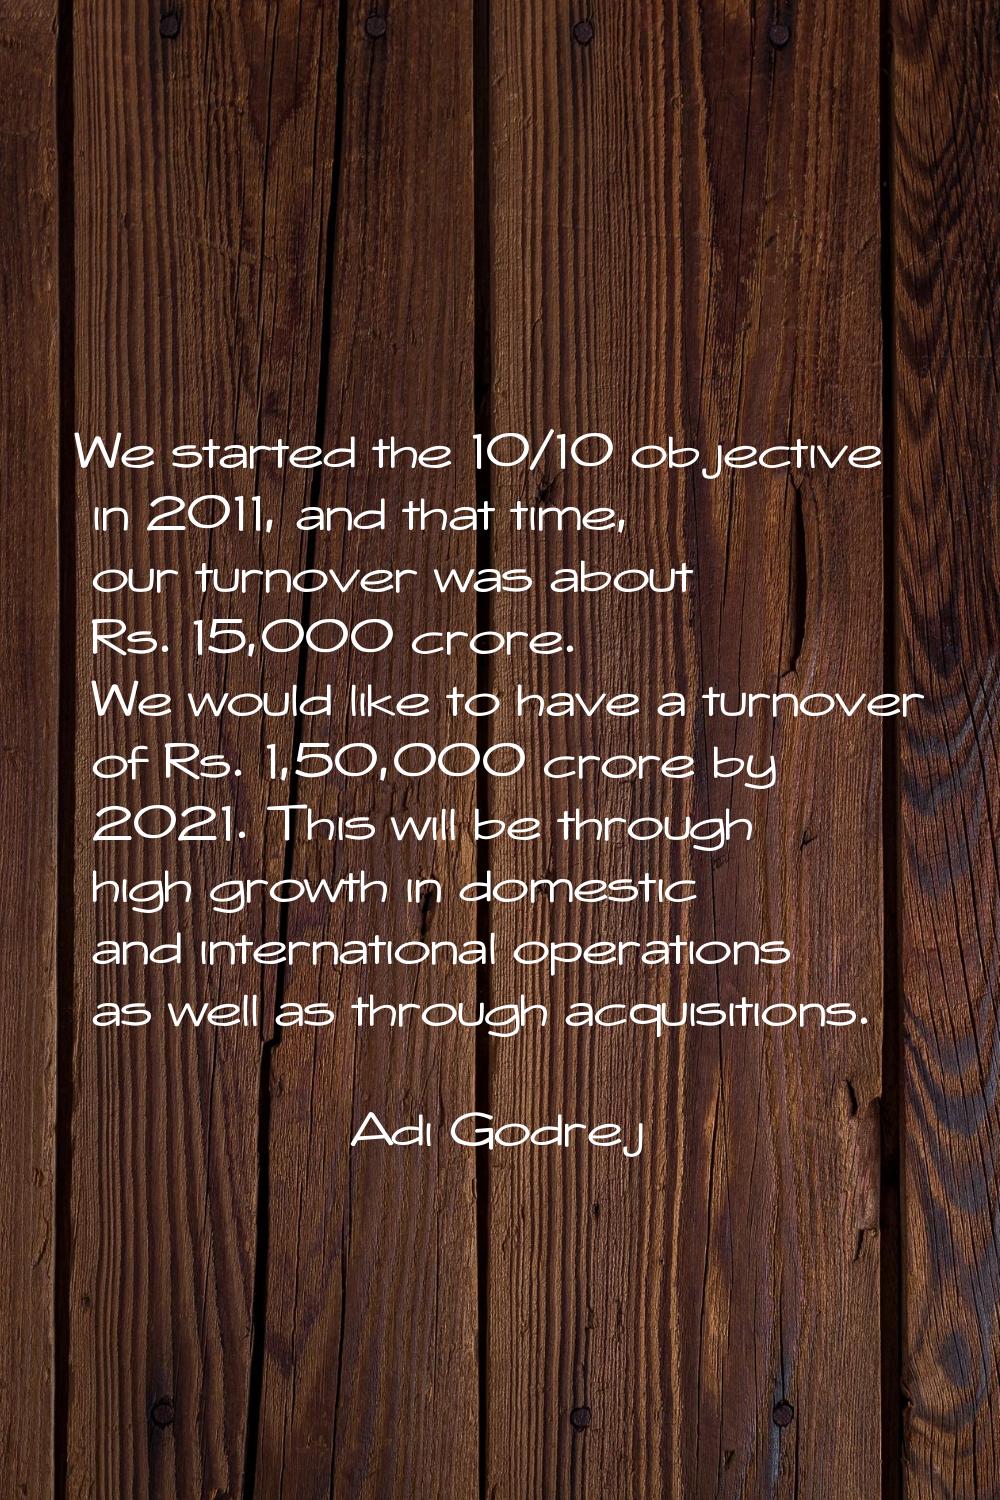 We started the 10/10 objective in 2011, and that time, our turnover was about Rs. 15,000 crore. We 